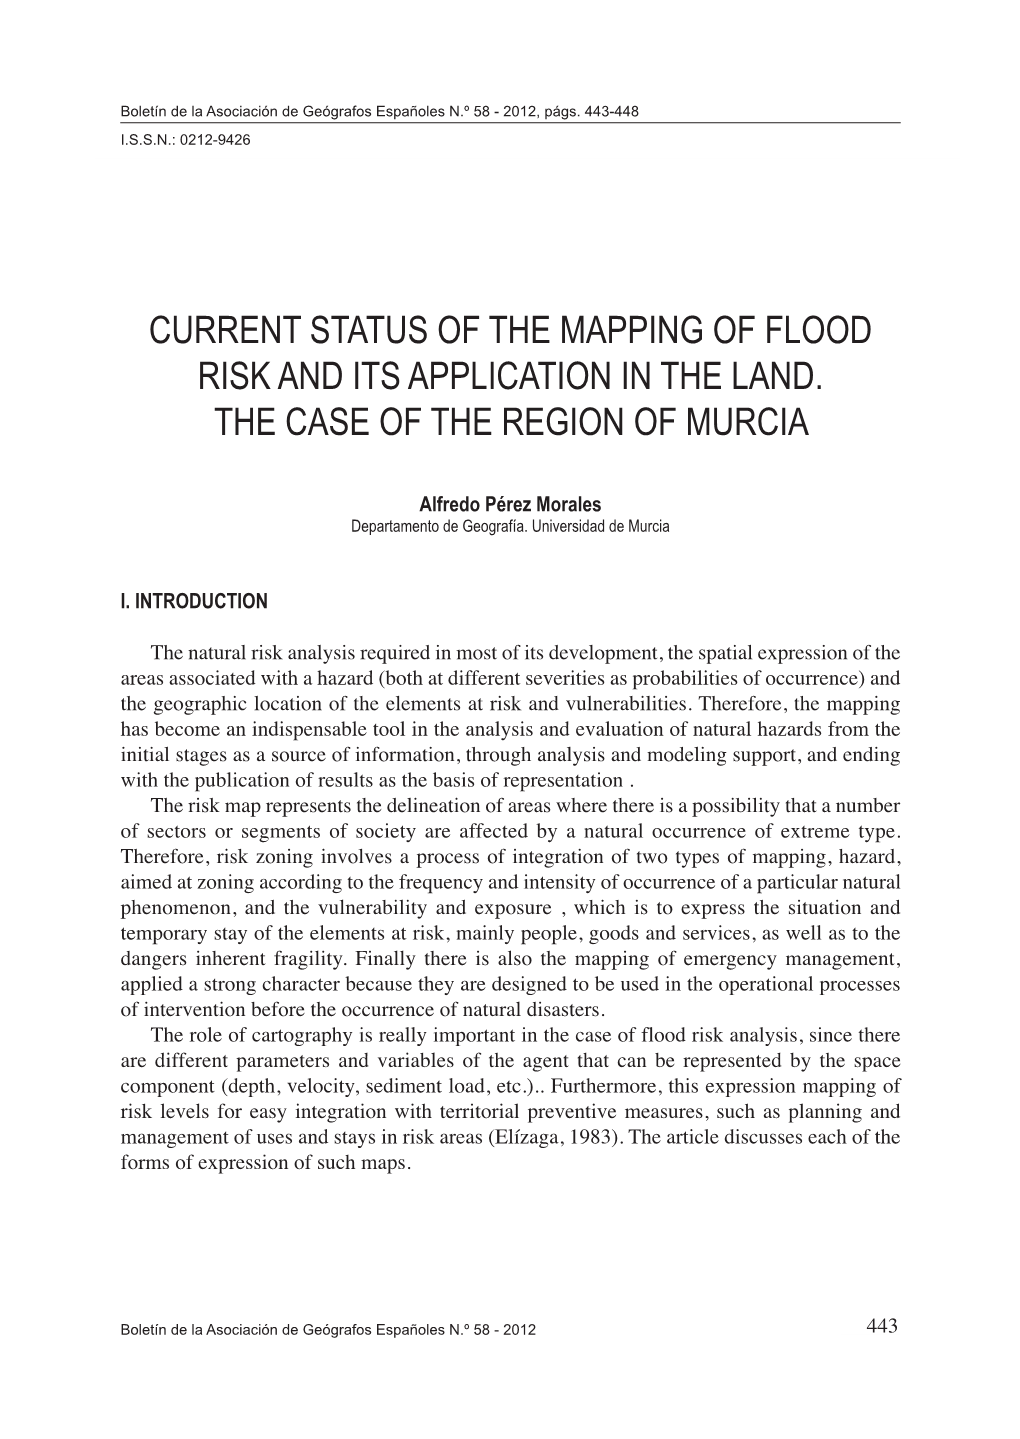 Current Status of the Mapping of Flood Risk and Its Application in the Land